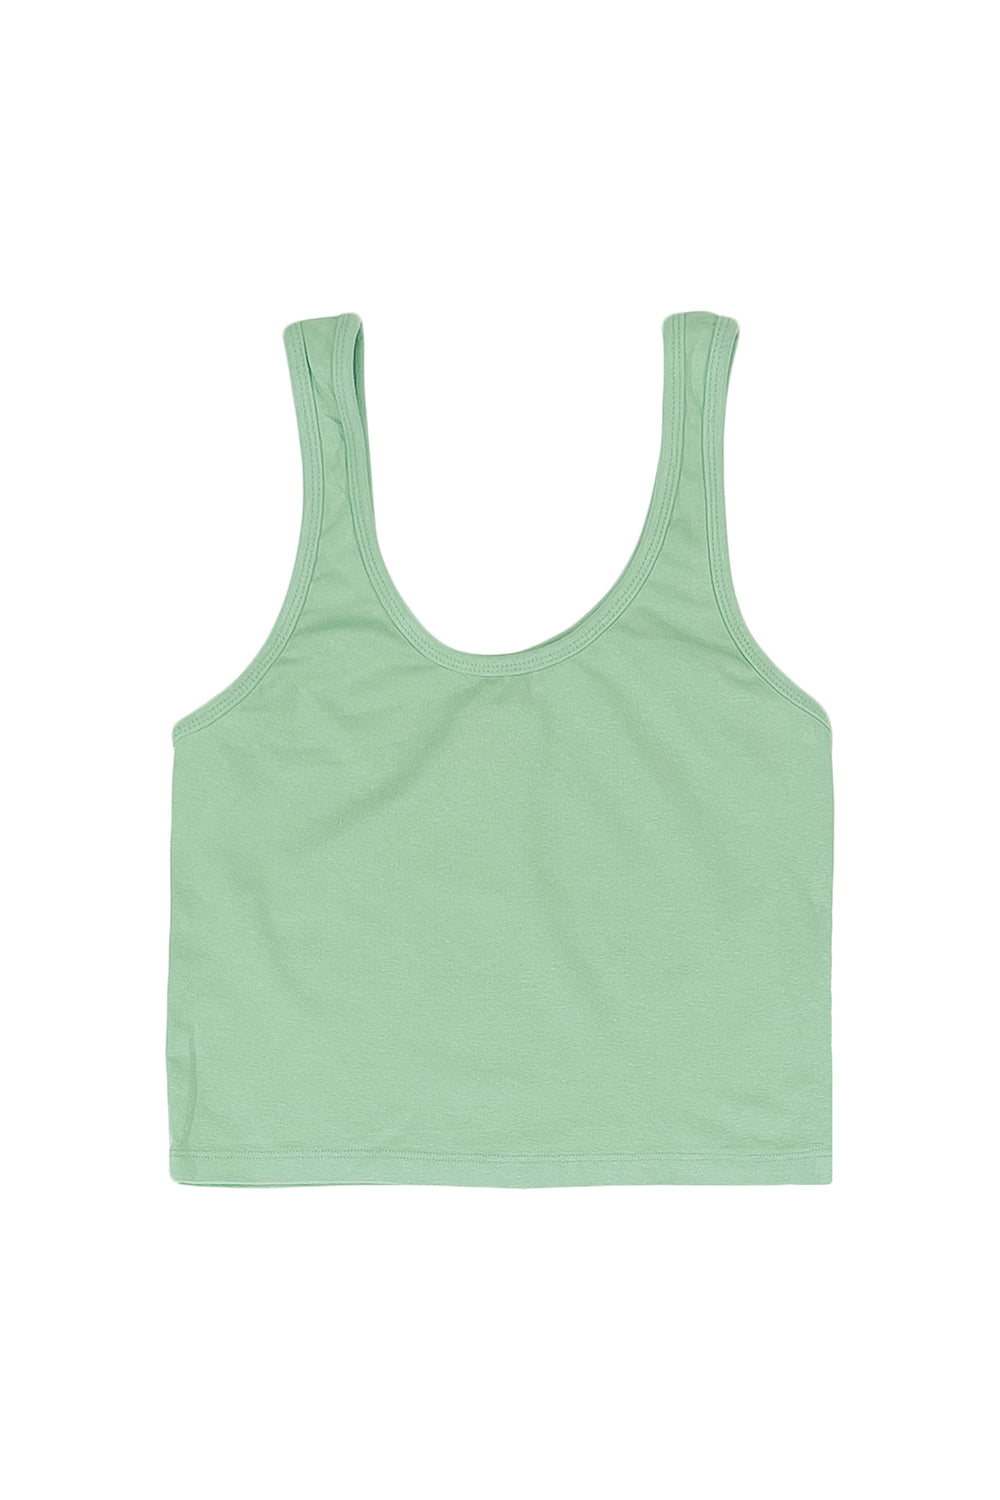 PROMOTE SALE Women Workout Crop Tank Tops with Built In Bra Light